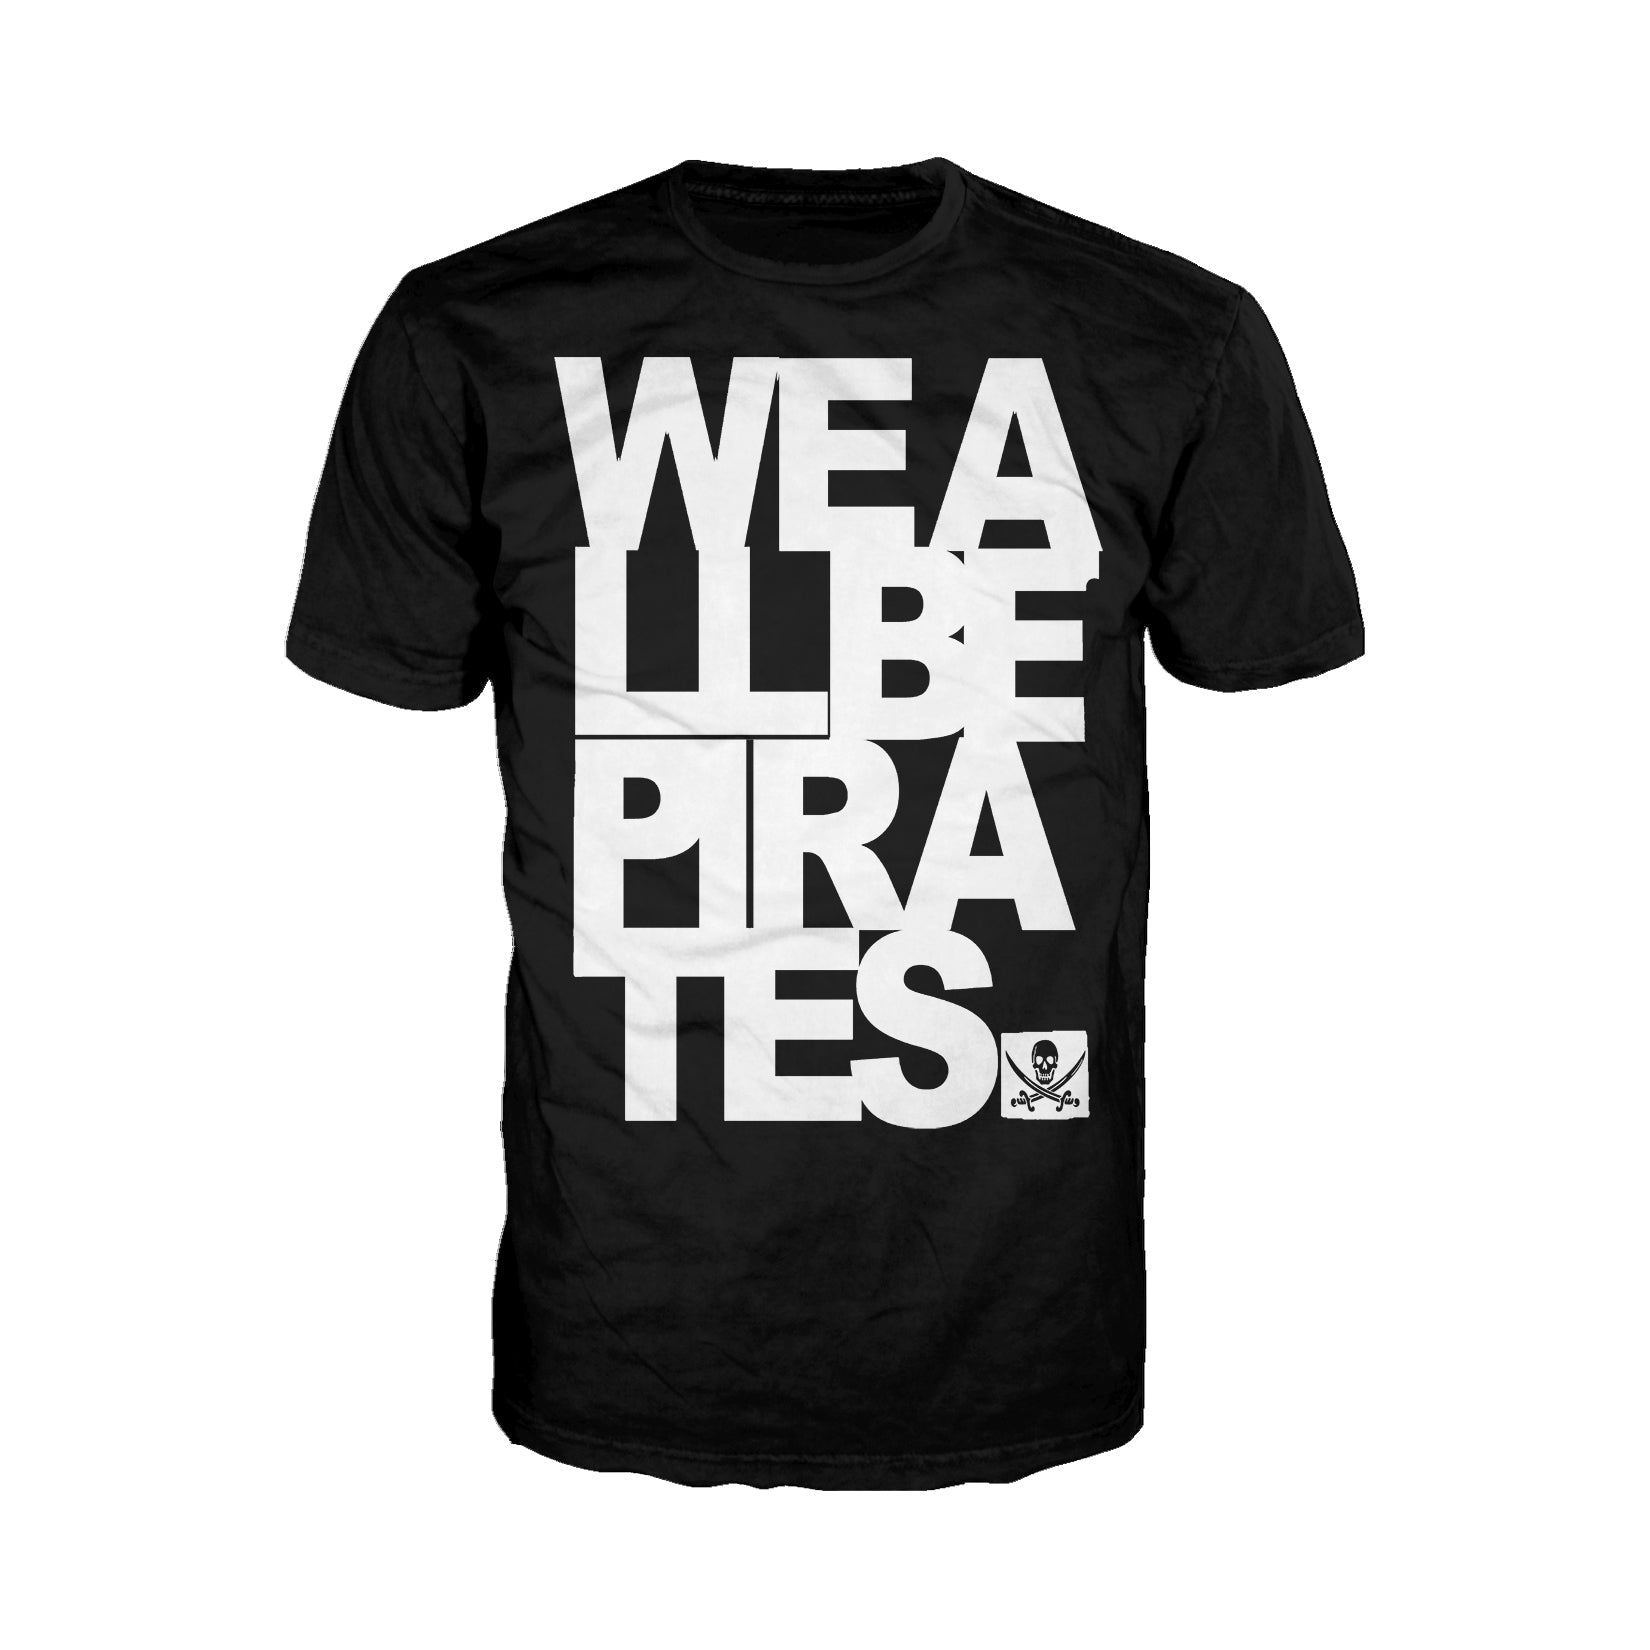 US Brand X Sci Funk We be Pirates Official Men's T-Shirt ()